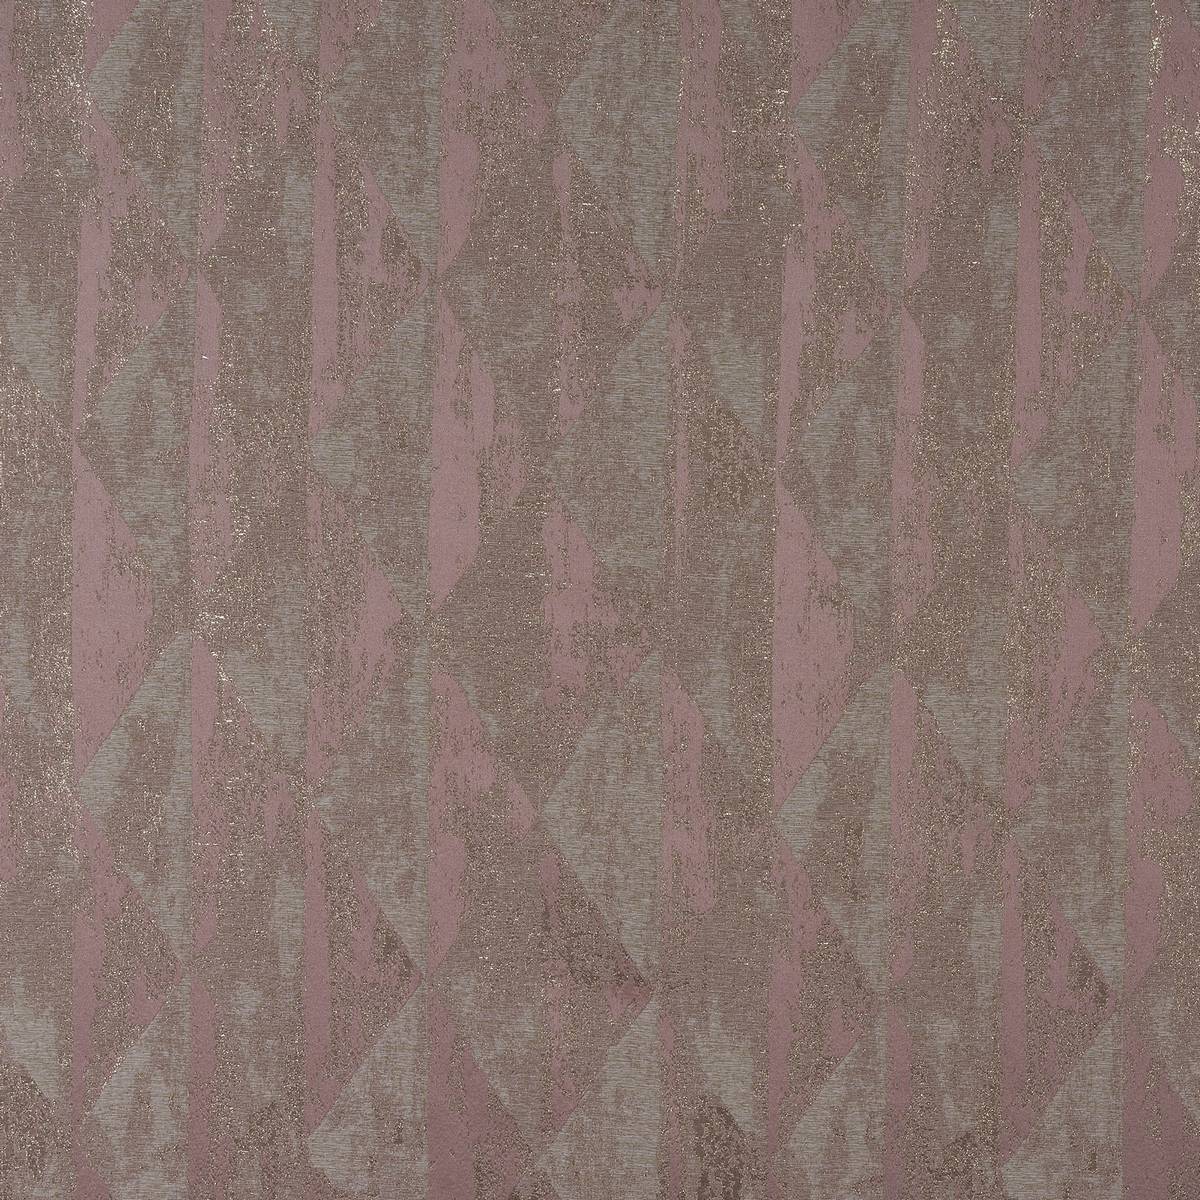 Mystique Rose Gold Fabric by Porter & Stone